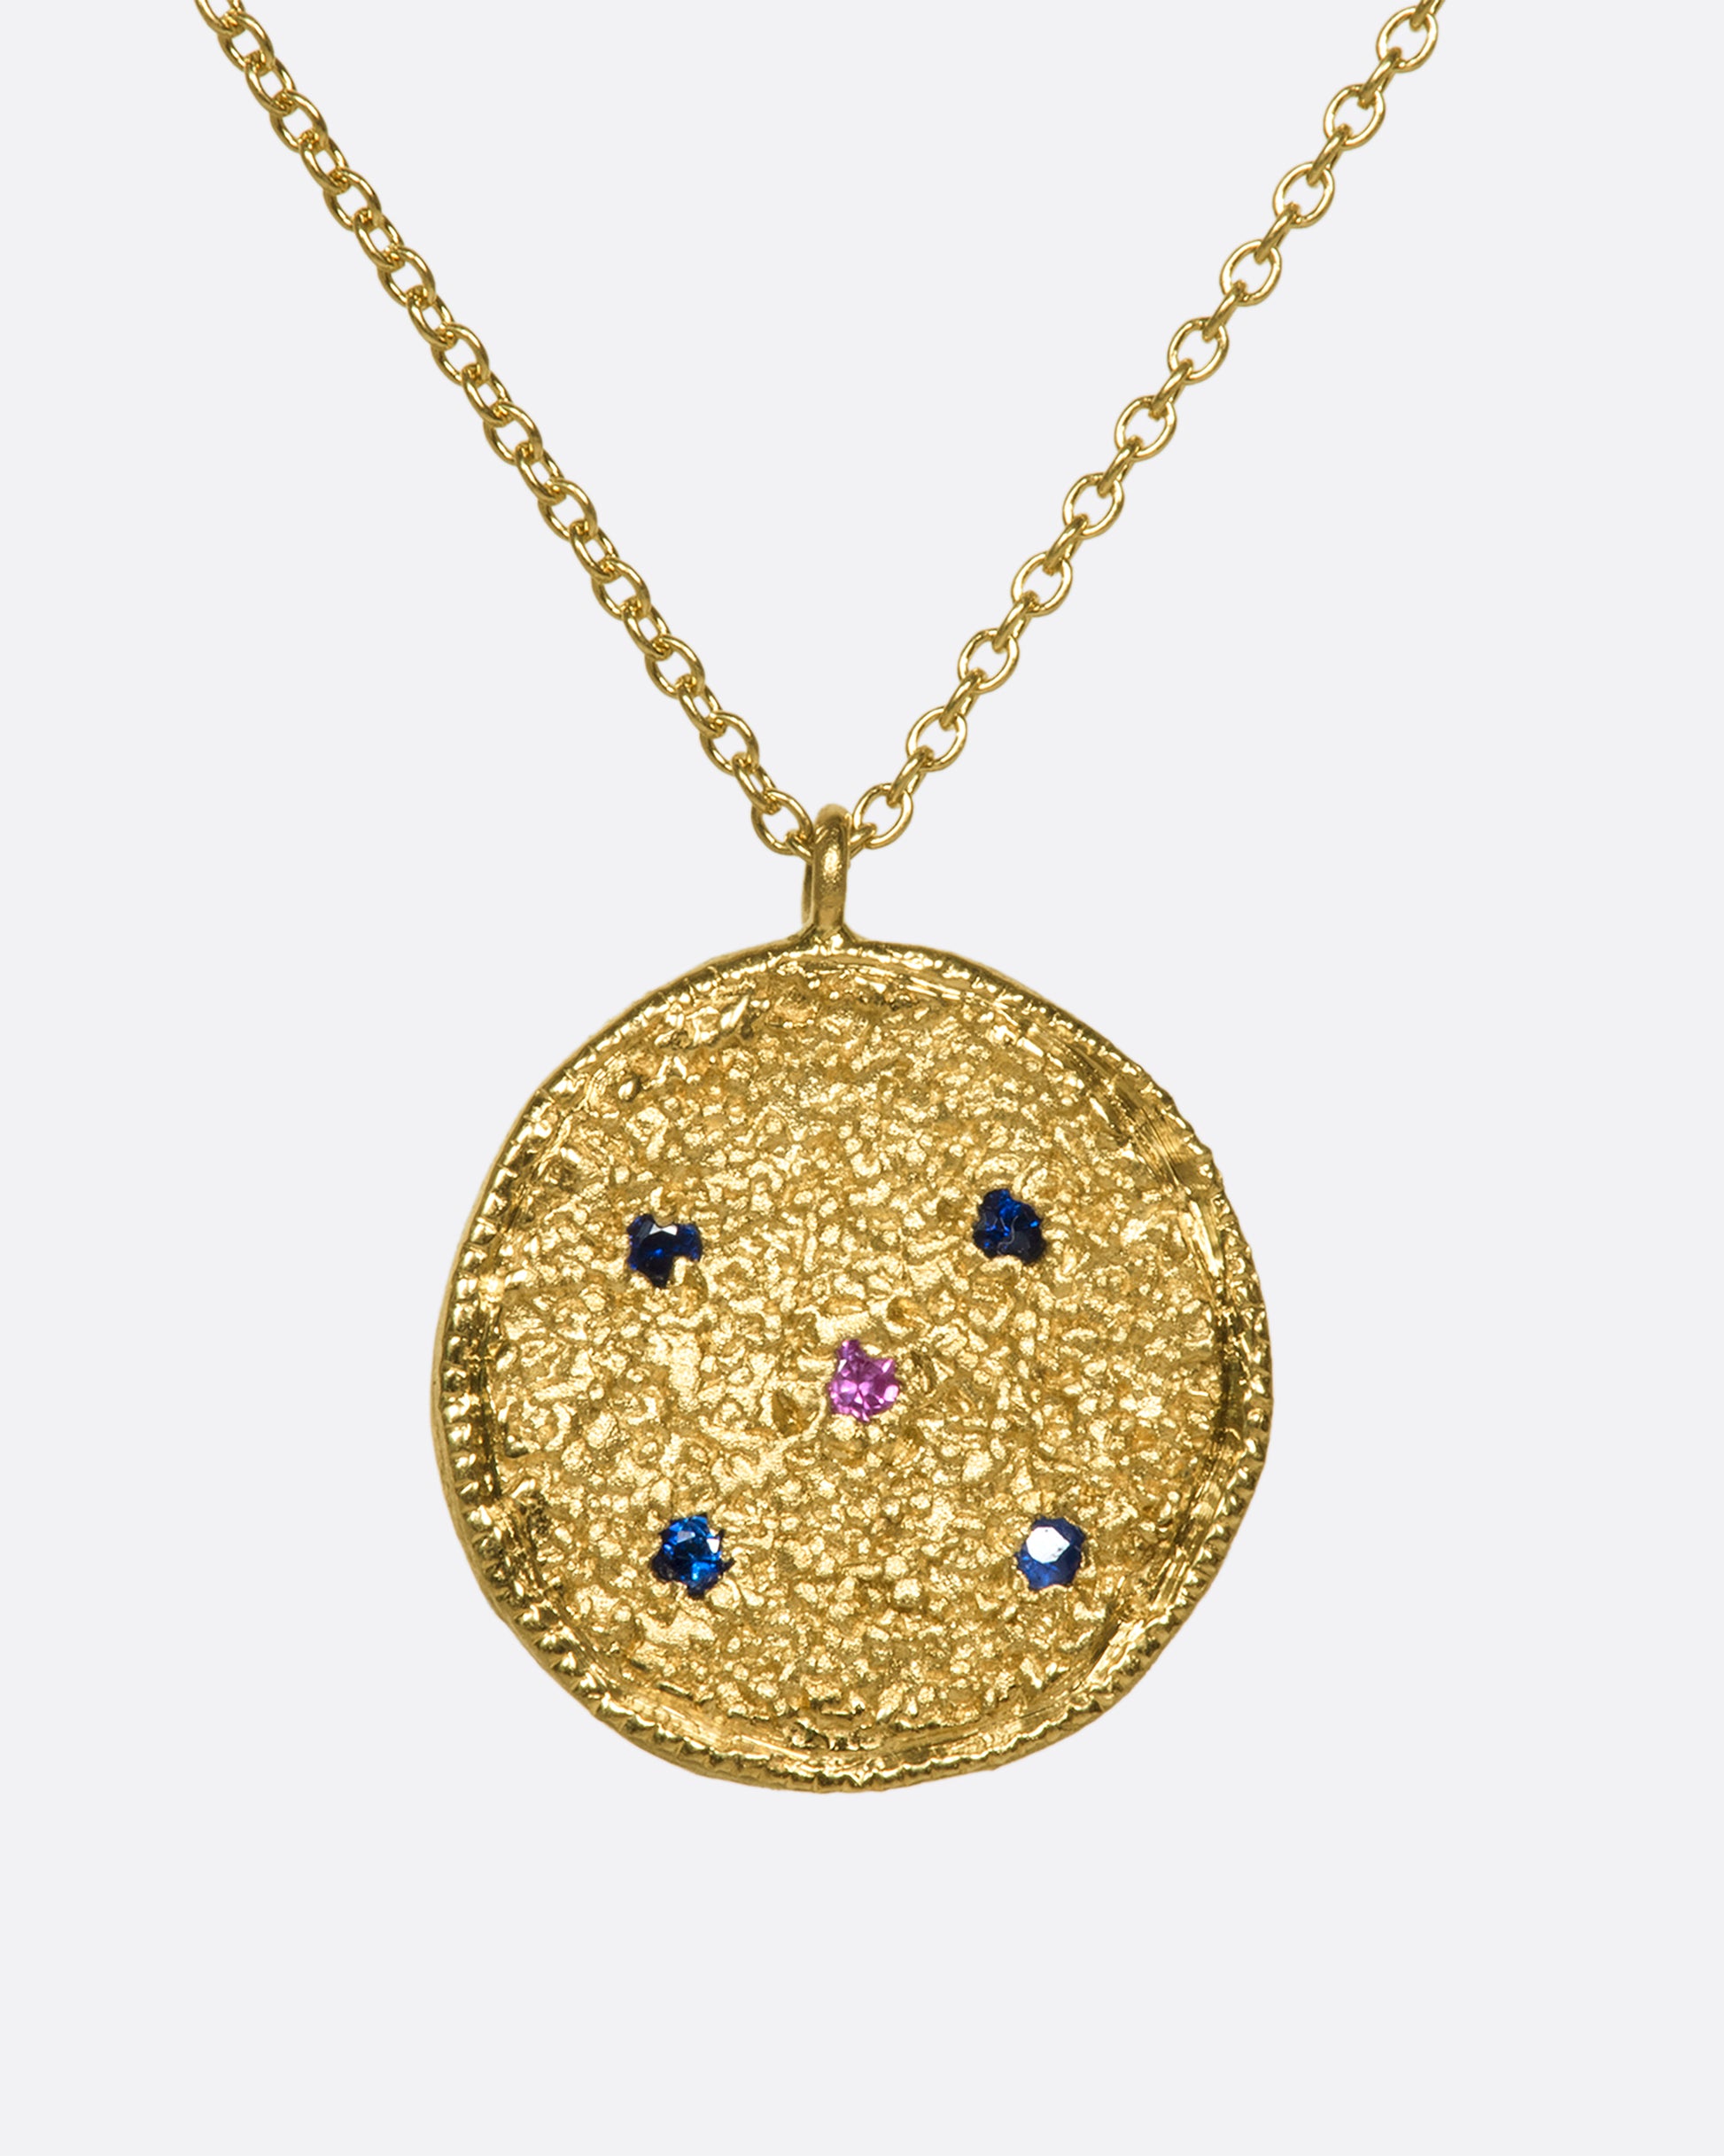 A textured disc pendant with blue and pink sapphires on a chain.